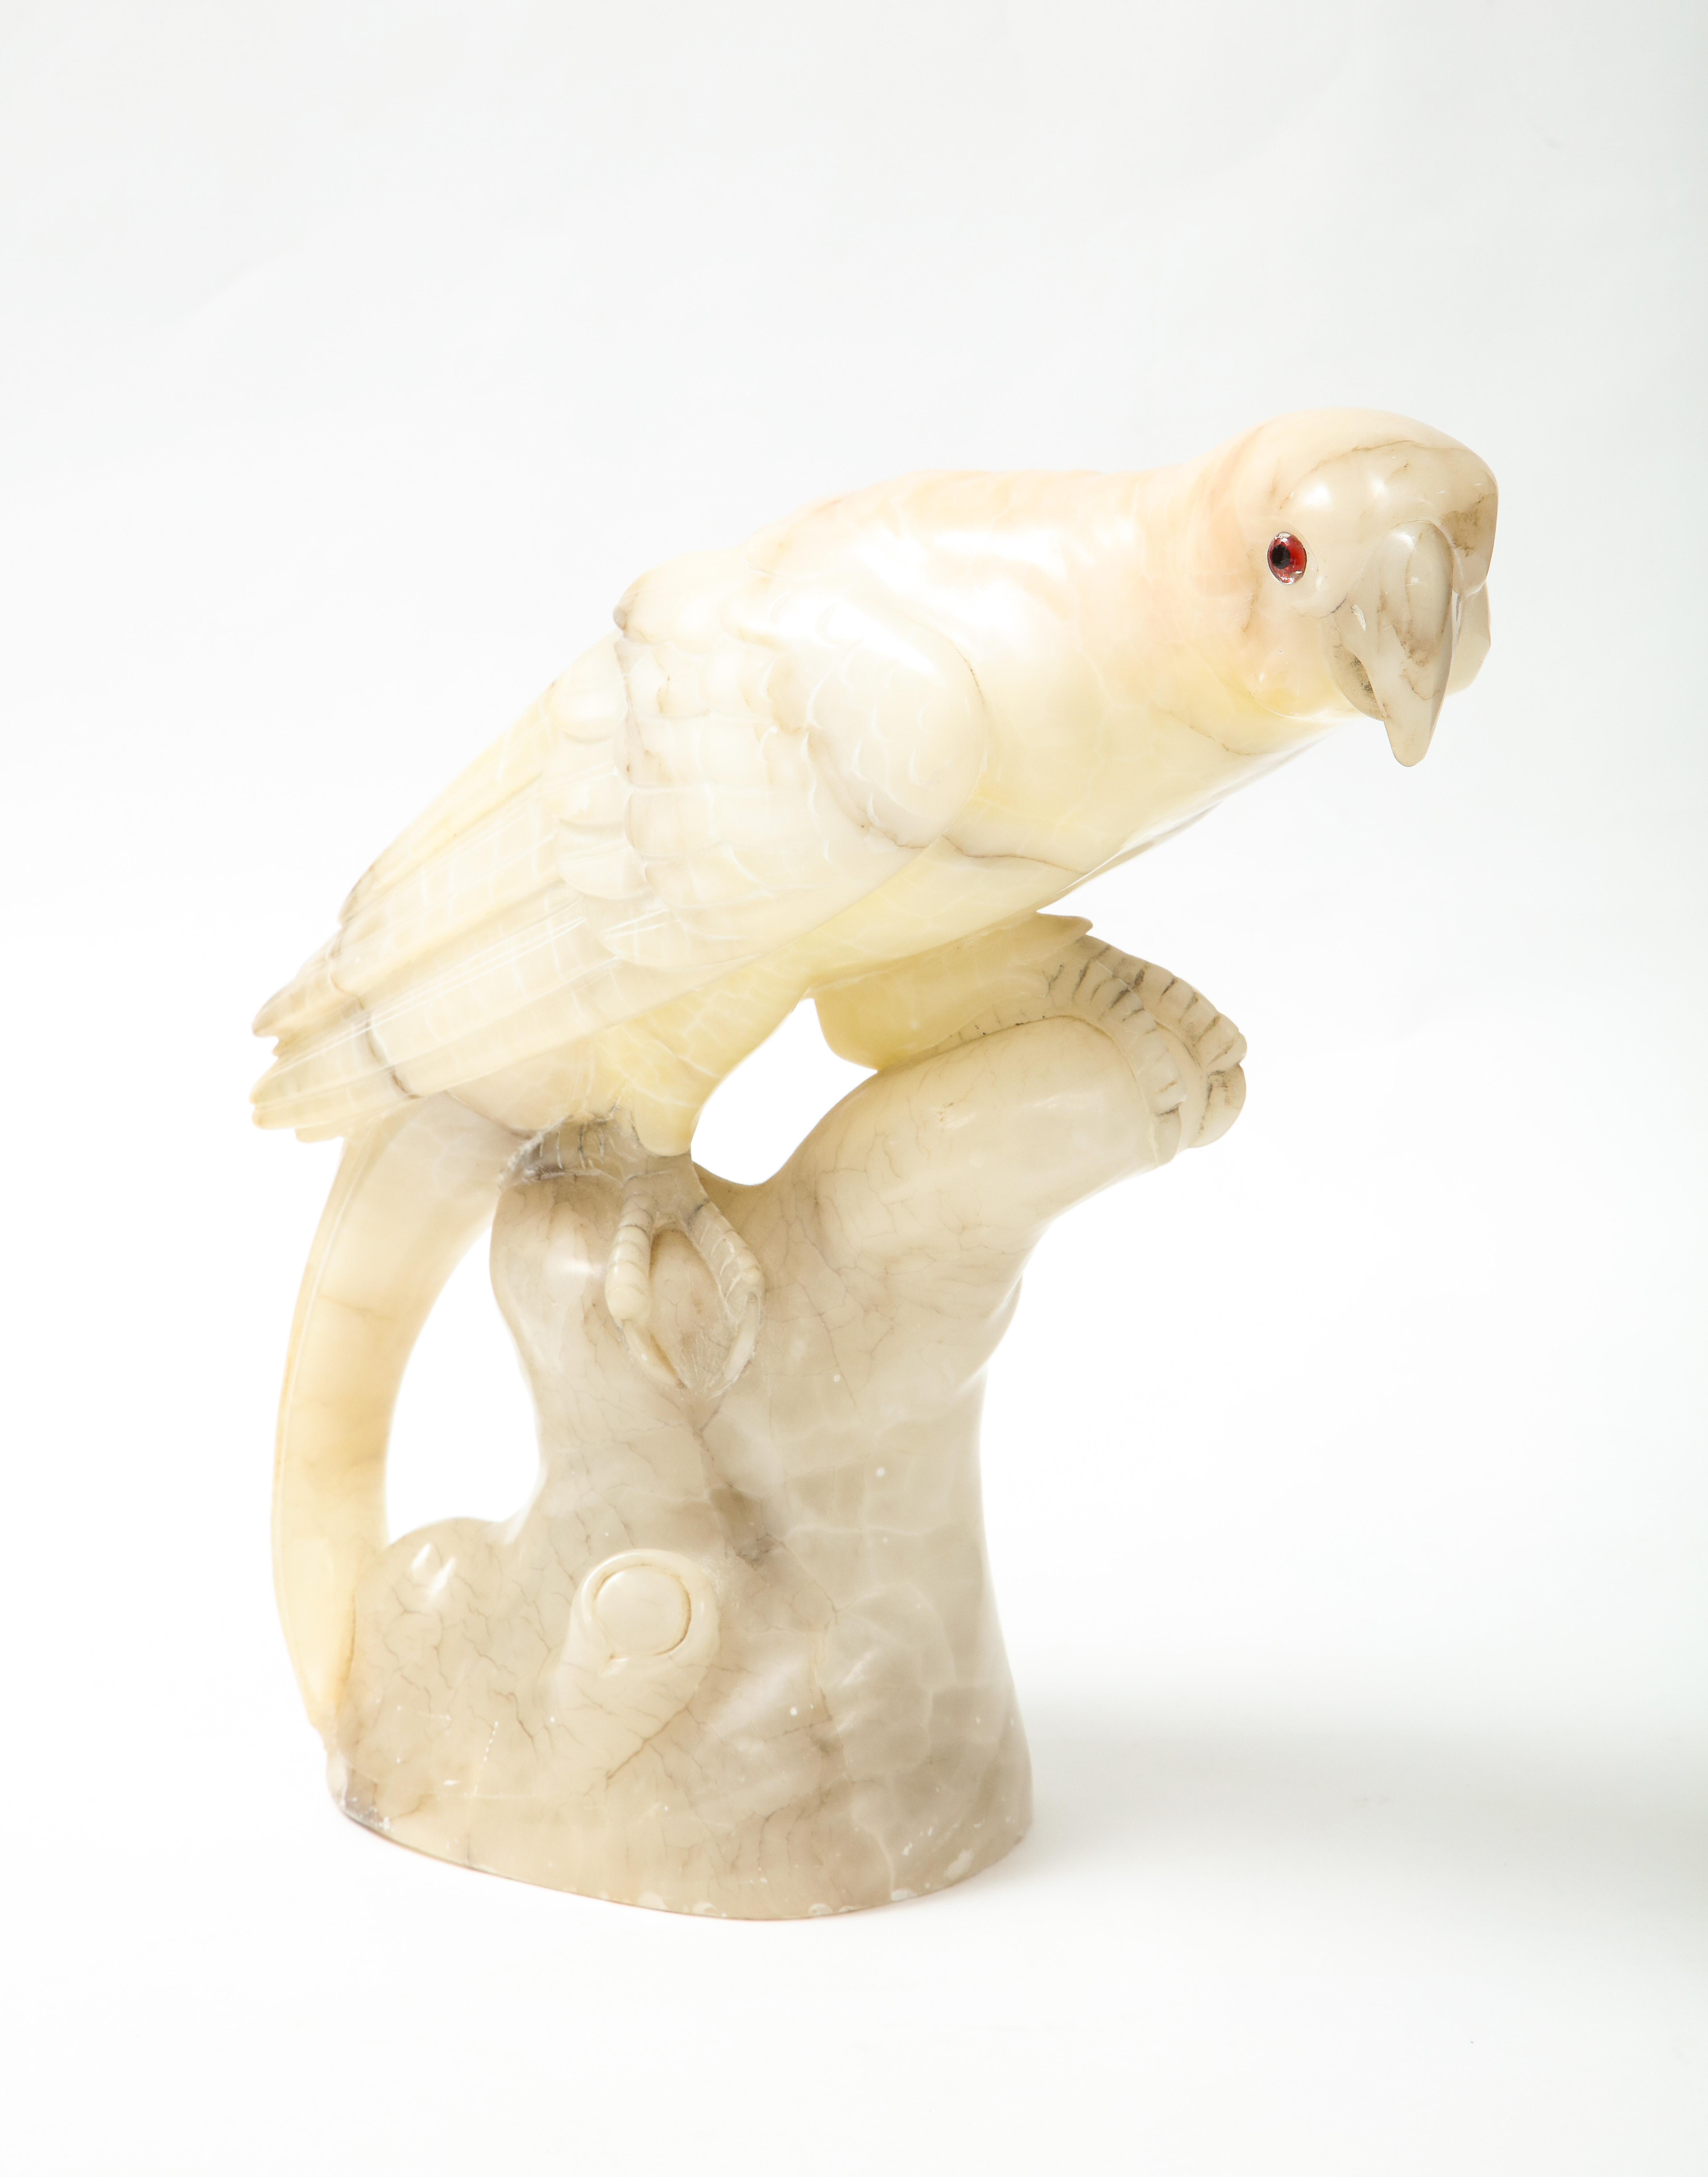 Beautifully carved Alabaster parrot with grey veining and glass eyes.